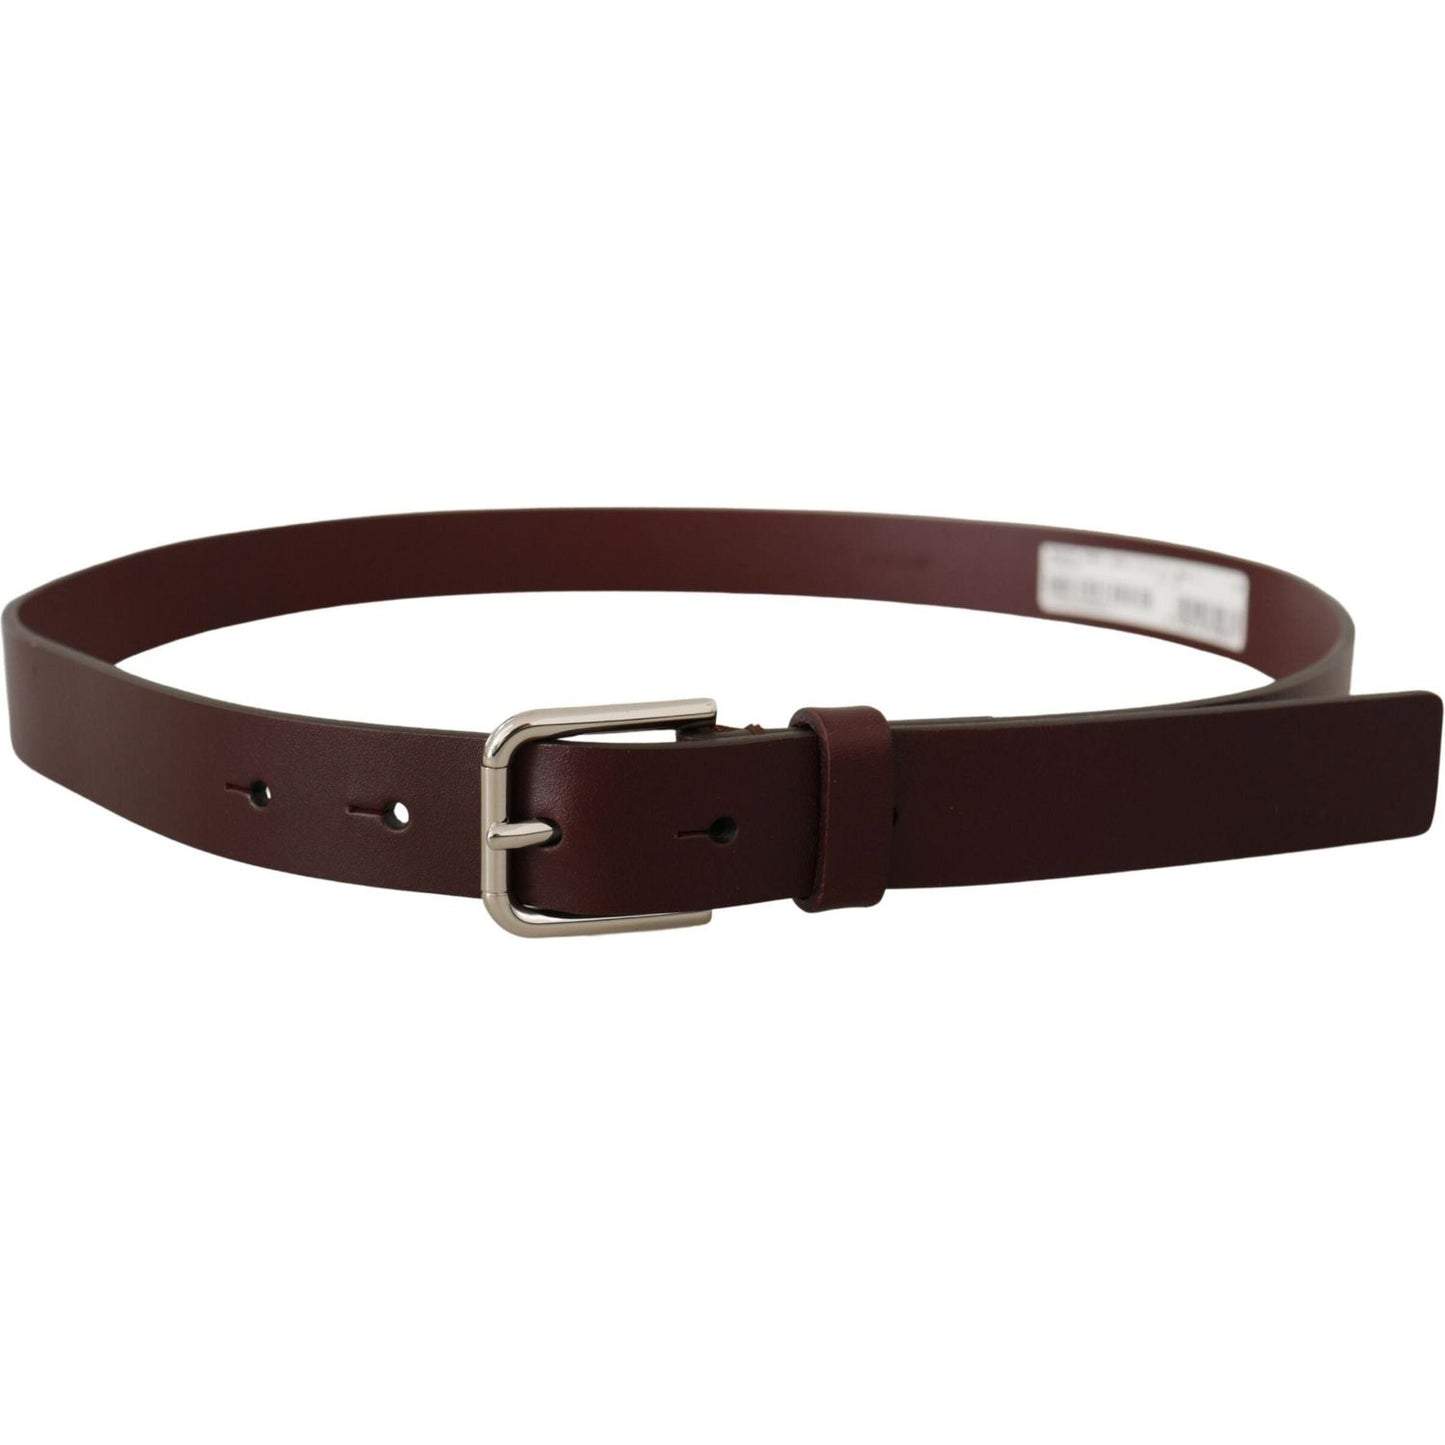 Dolce & Gabbana Maroon Luxe Leather Belt with Metal Buckle maroon-calf-leather-silver-tone-metal-buckle-belt-1